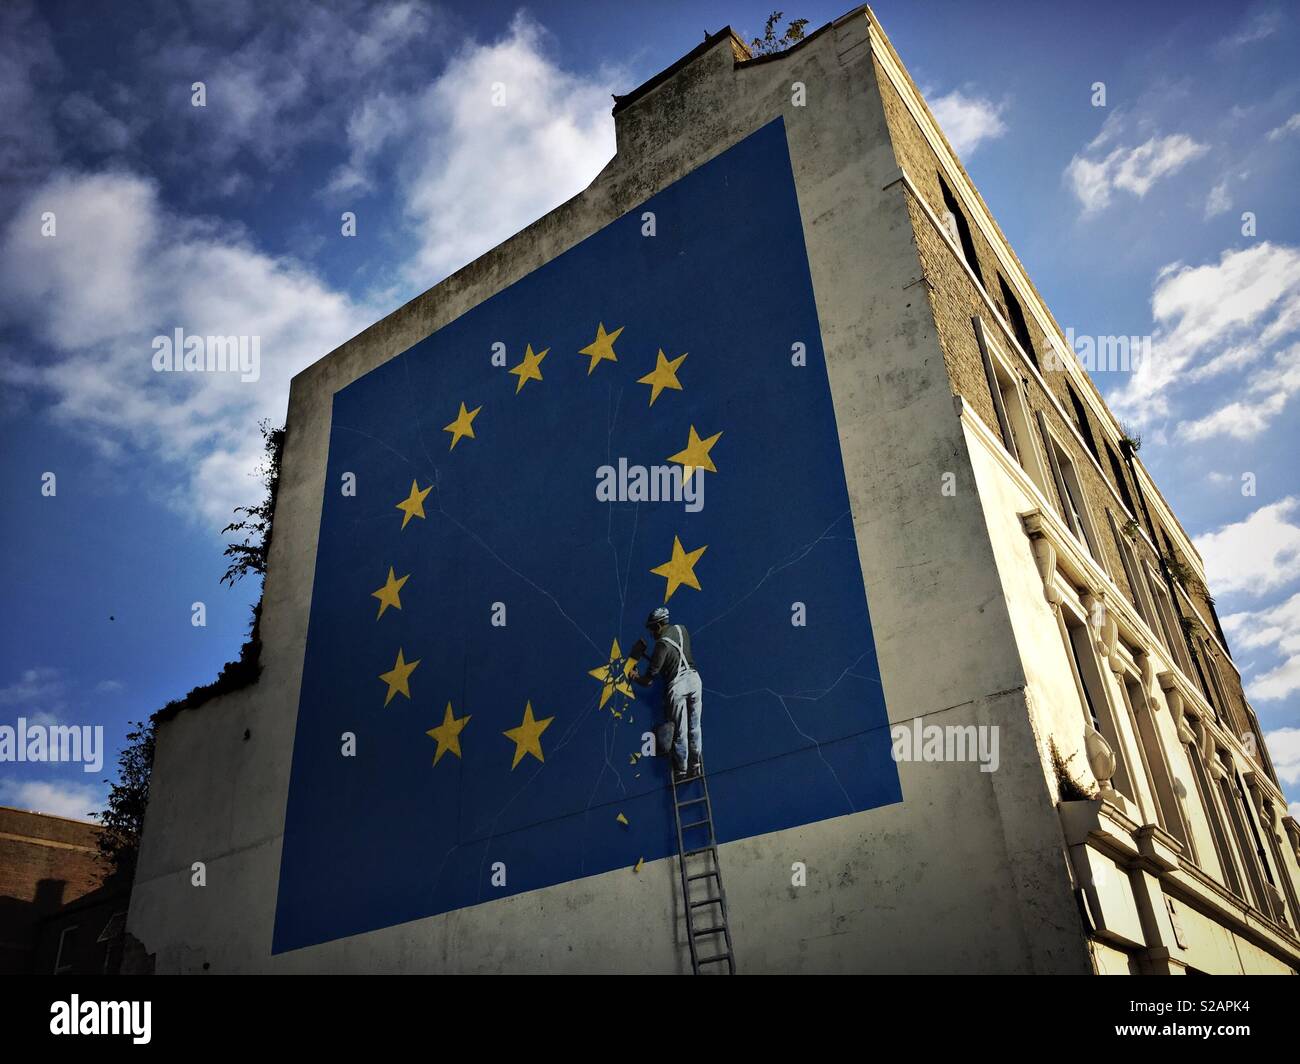 A mural by graffiti artist “Banksy” depicting a worker chiselling away a star representing the U.K on an EU flag following Brexit is seen in Dover in southeast England. Stock Photo